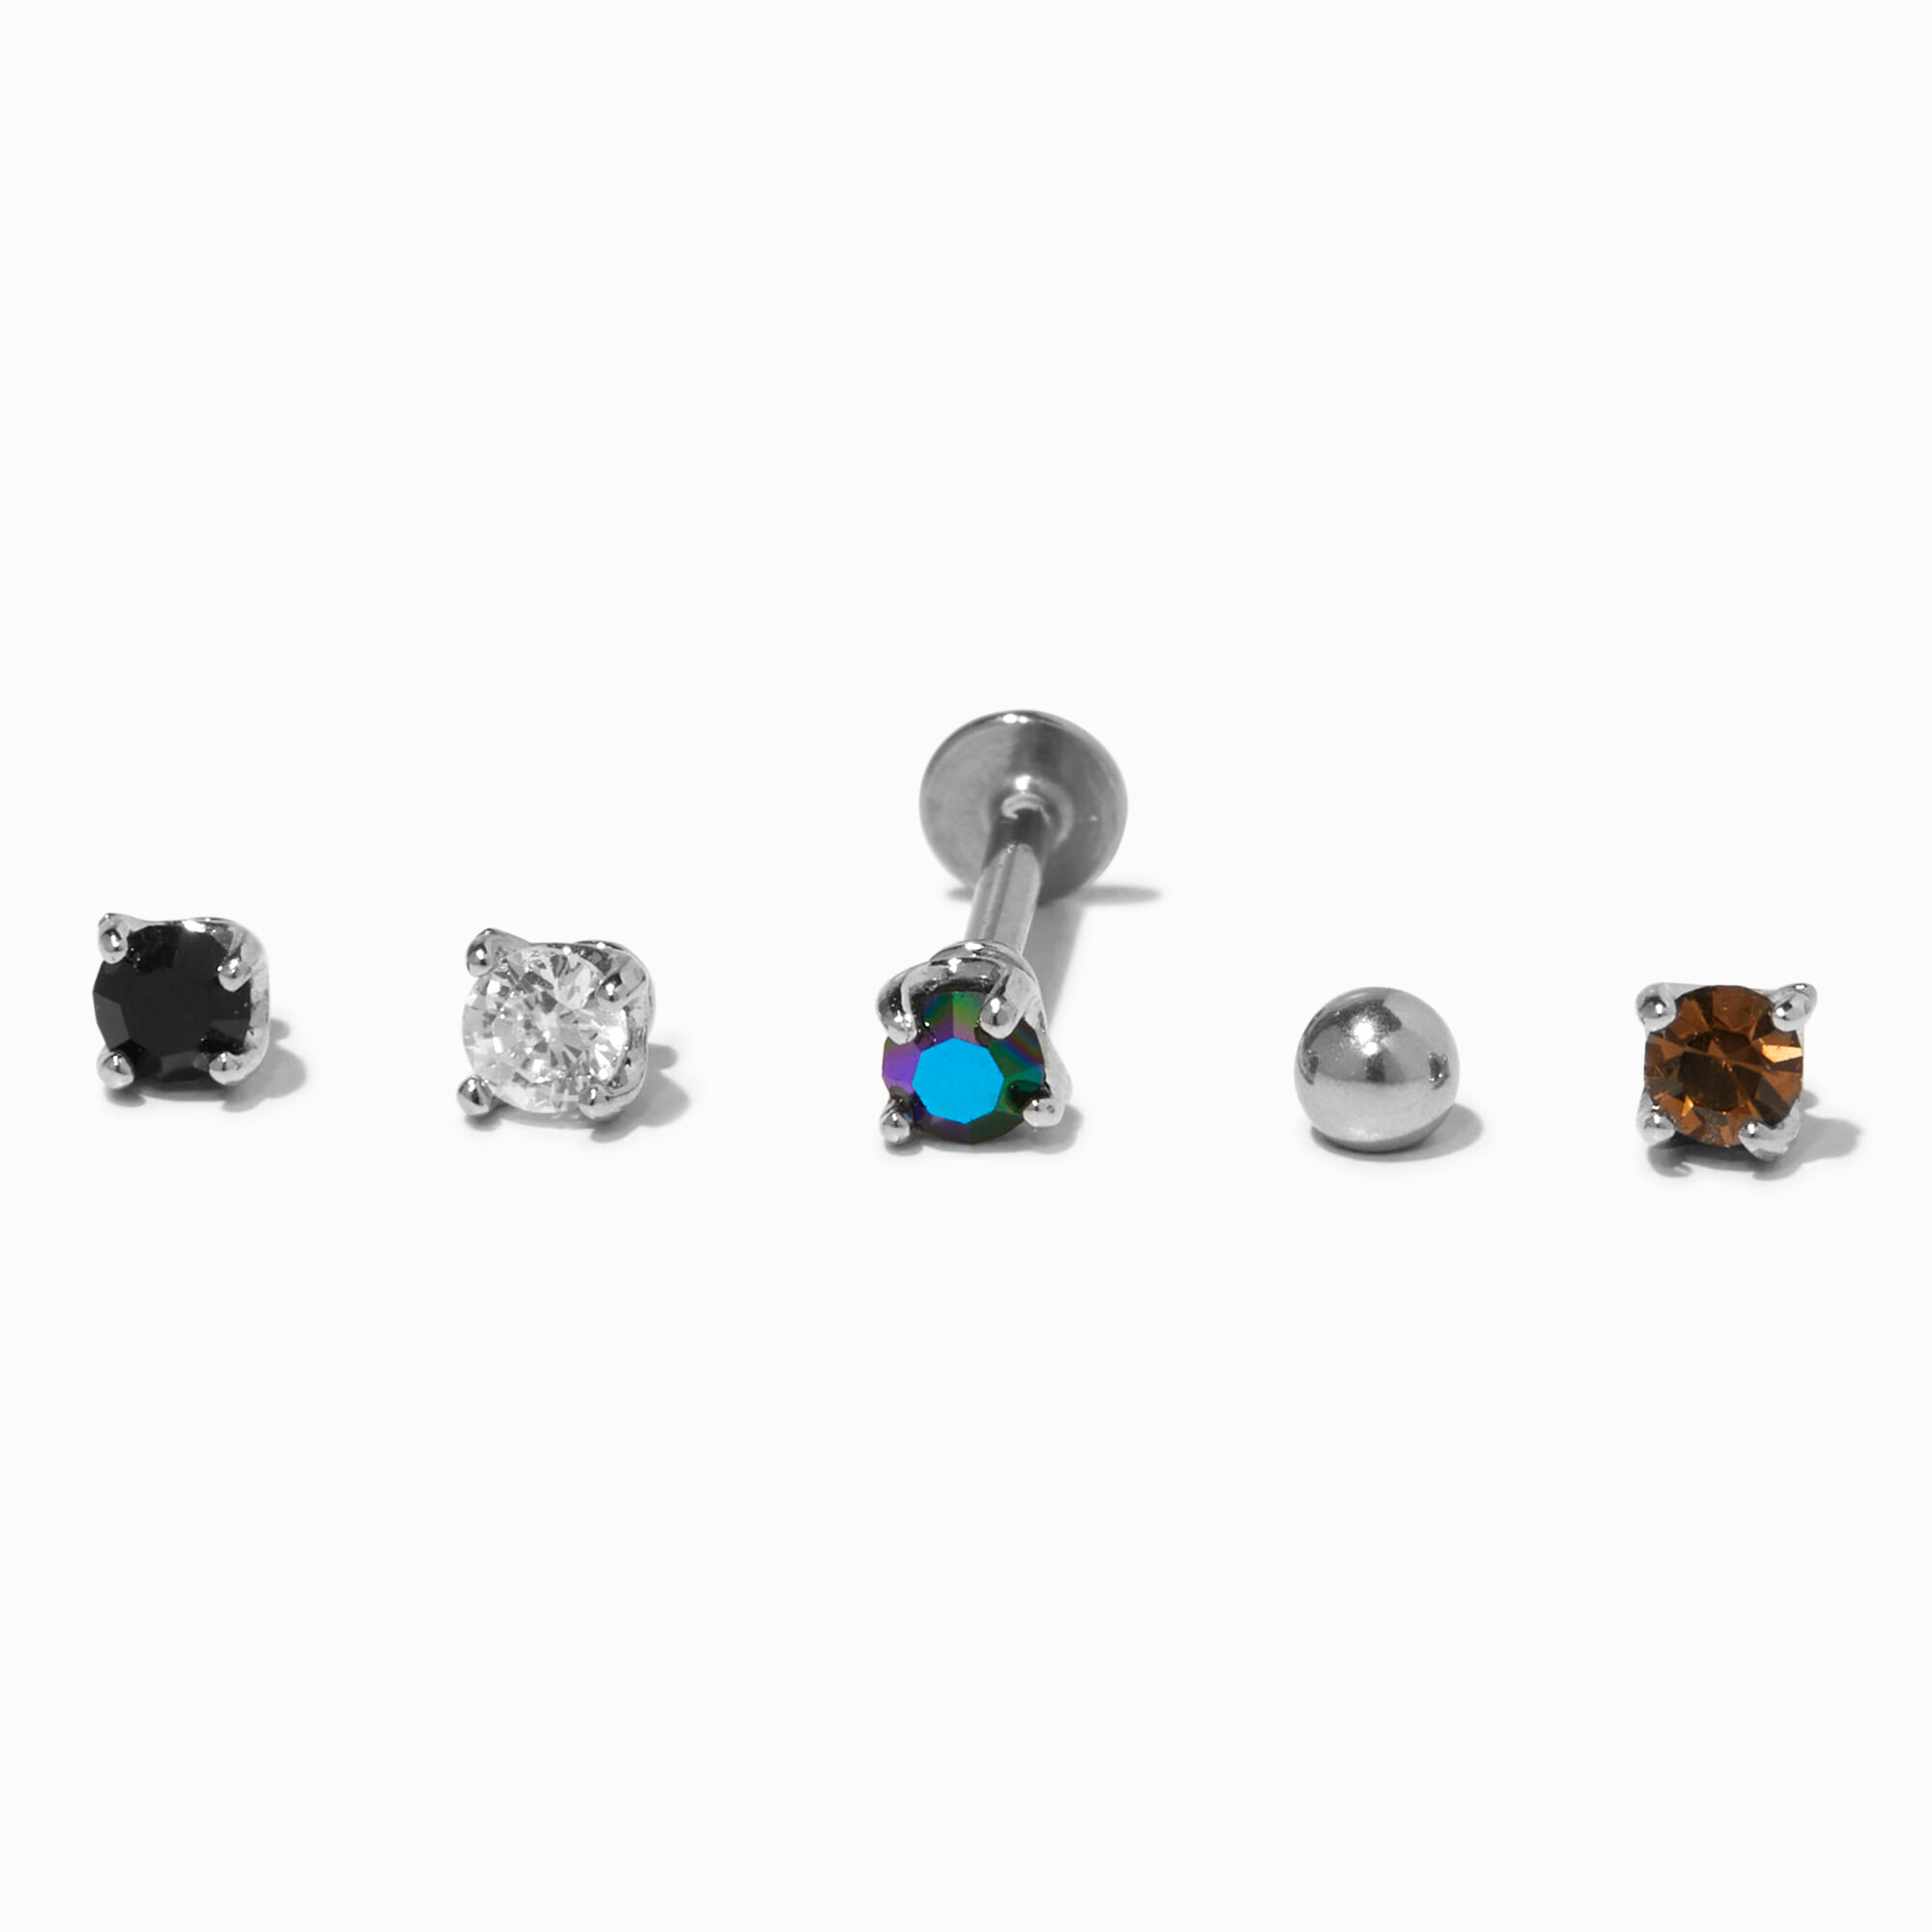 View Claires Tone Multi Changeable Flat Back Tragus Earrings 5 Pack Silver information